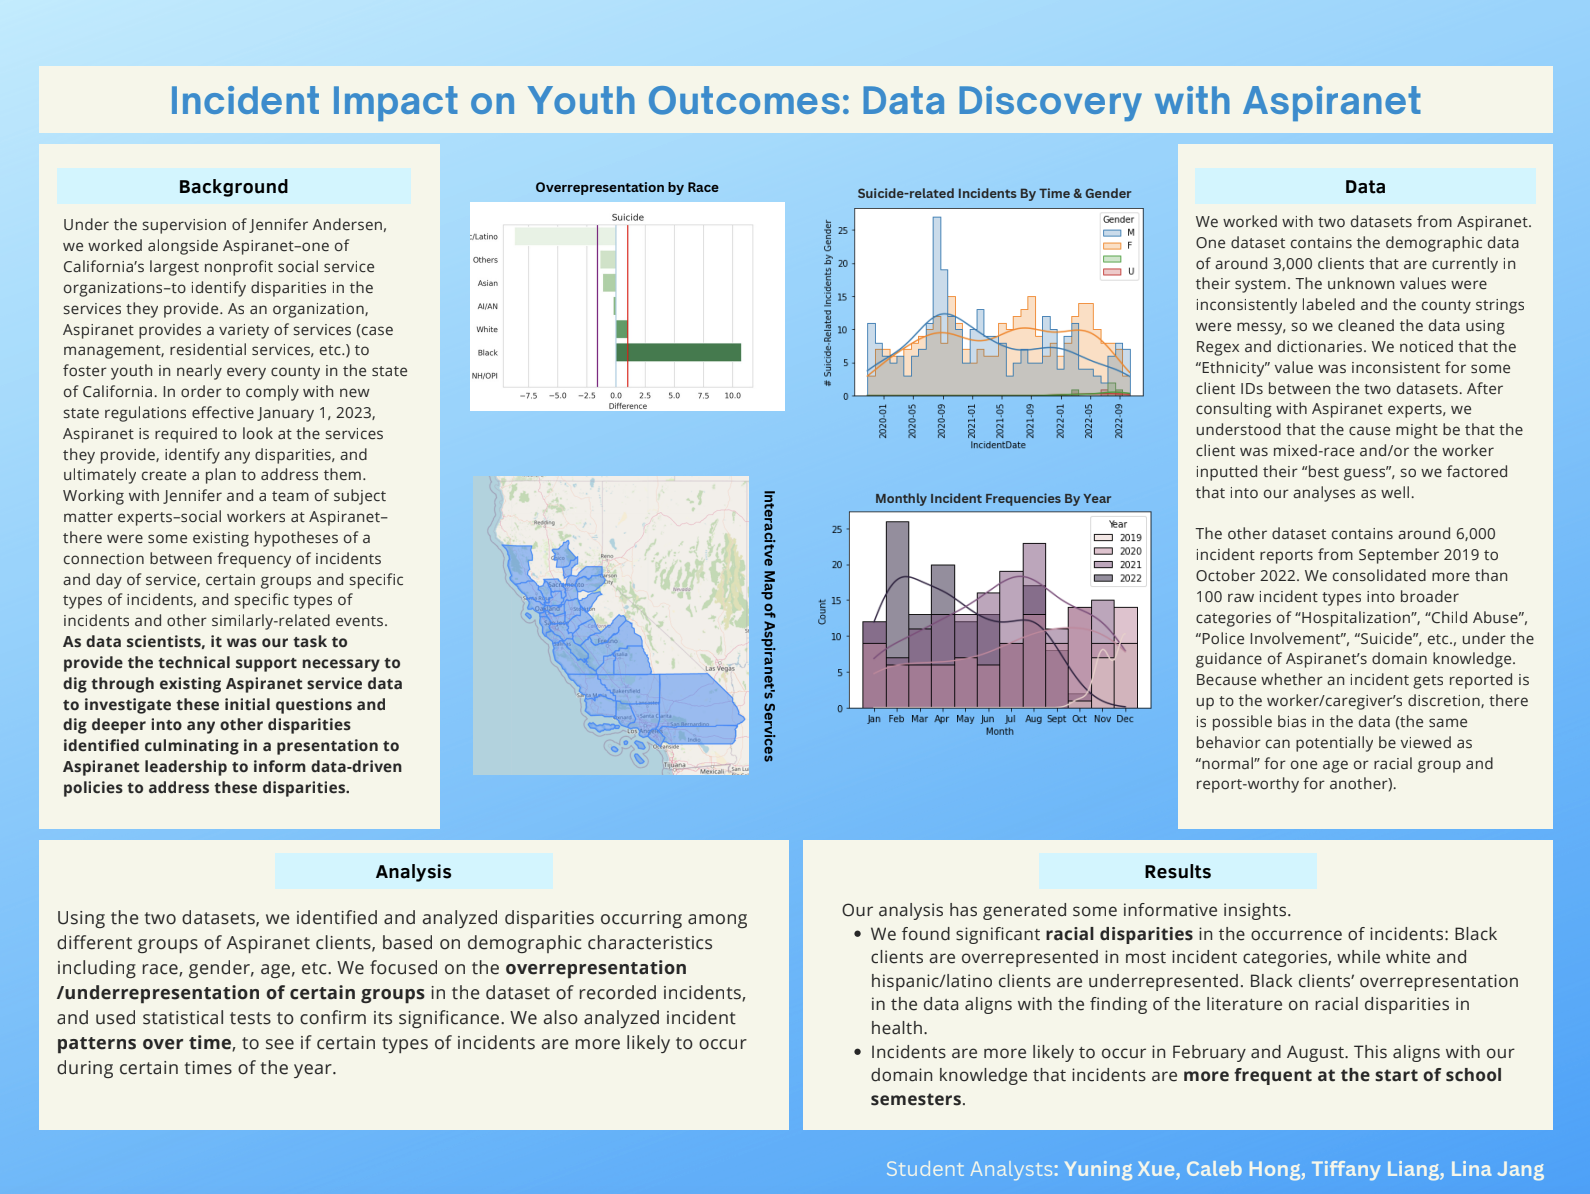 Aspiranet - Incident Impact on Youth Outcomes - Fall 2022 Discovery Project